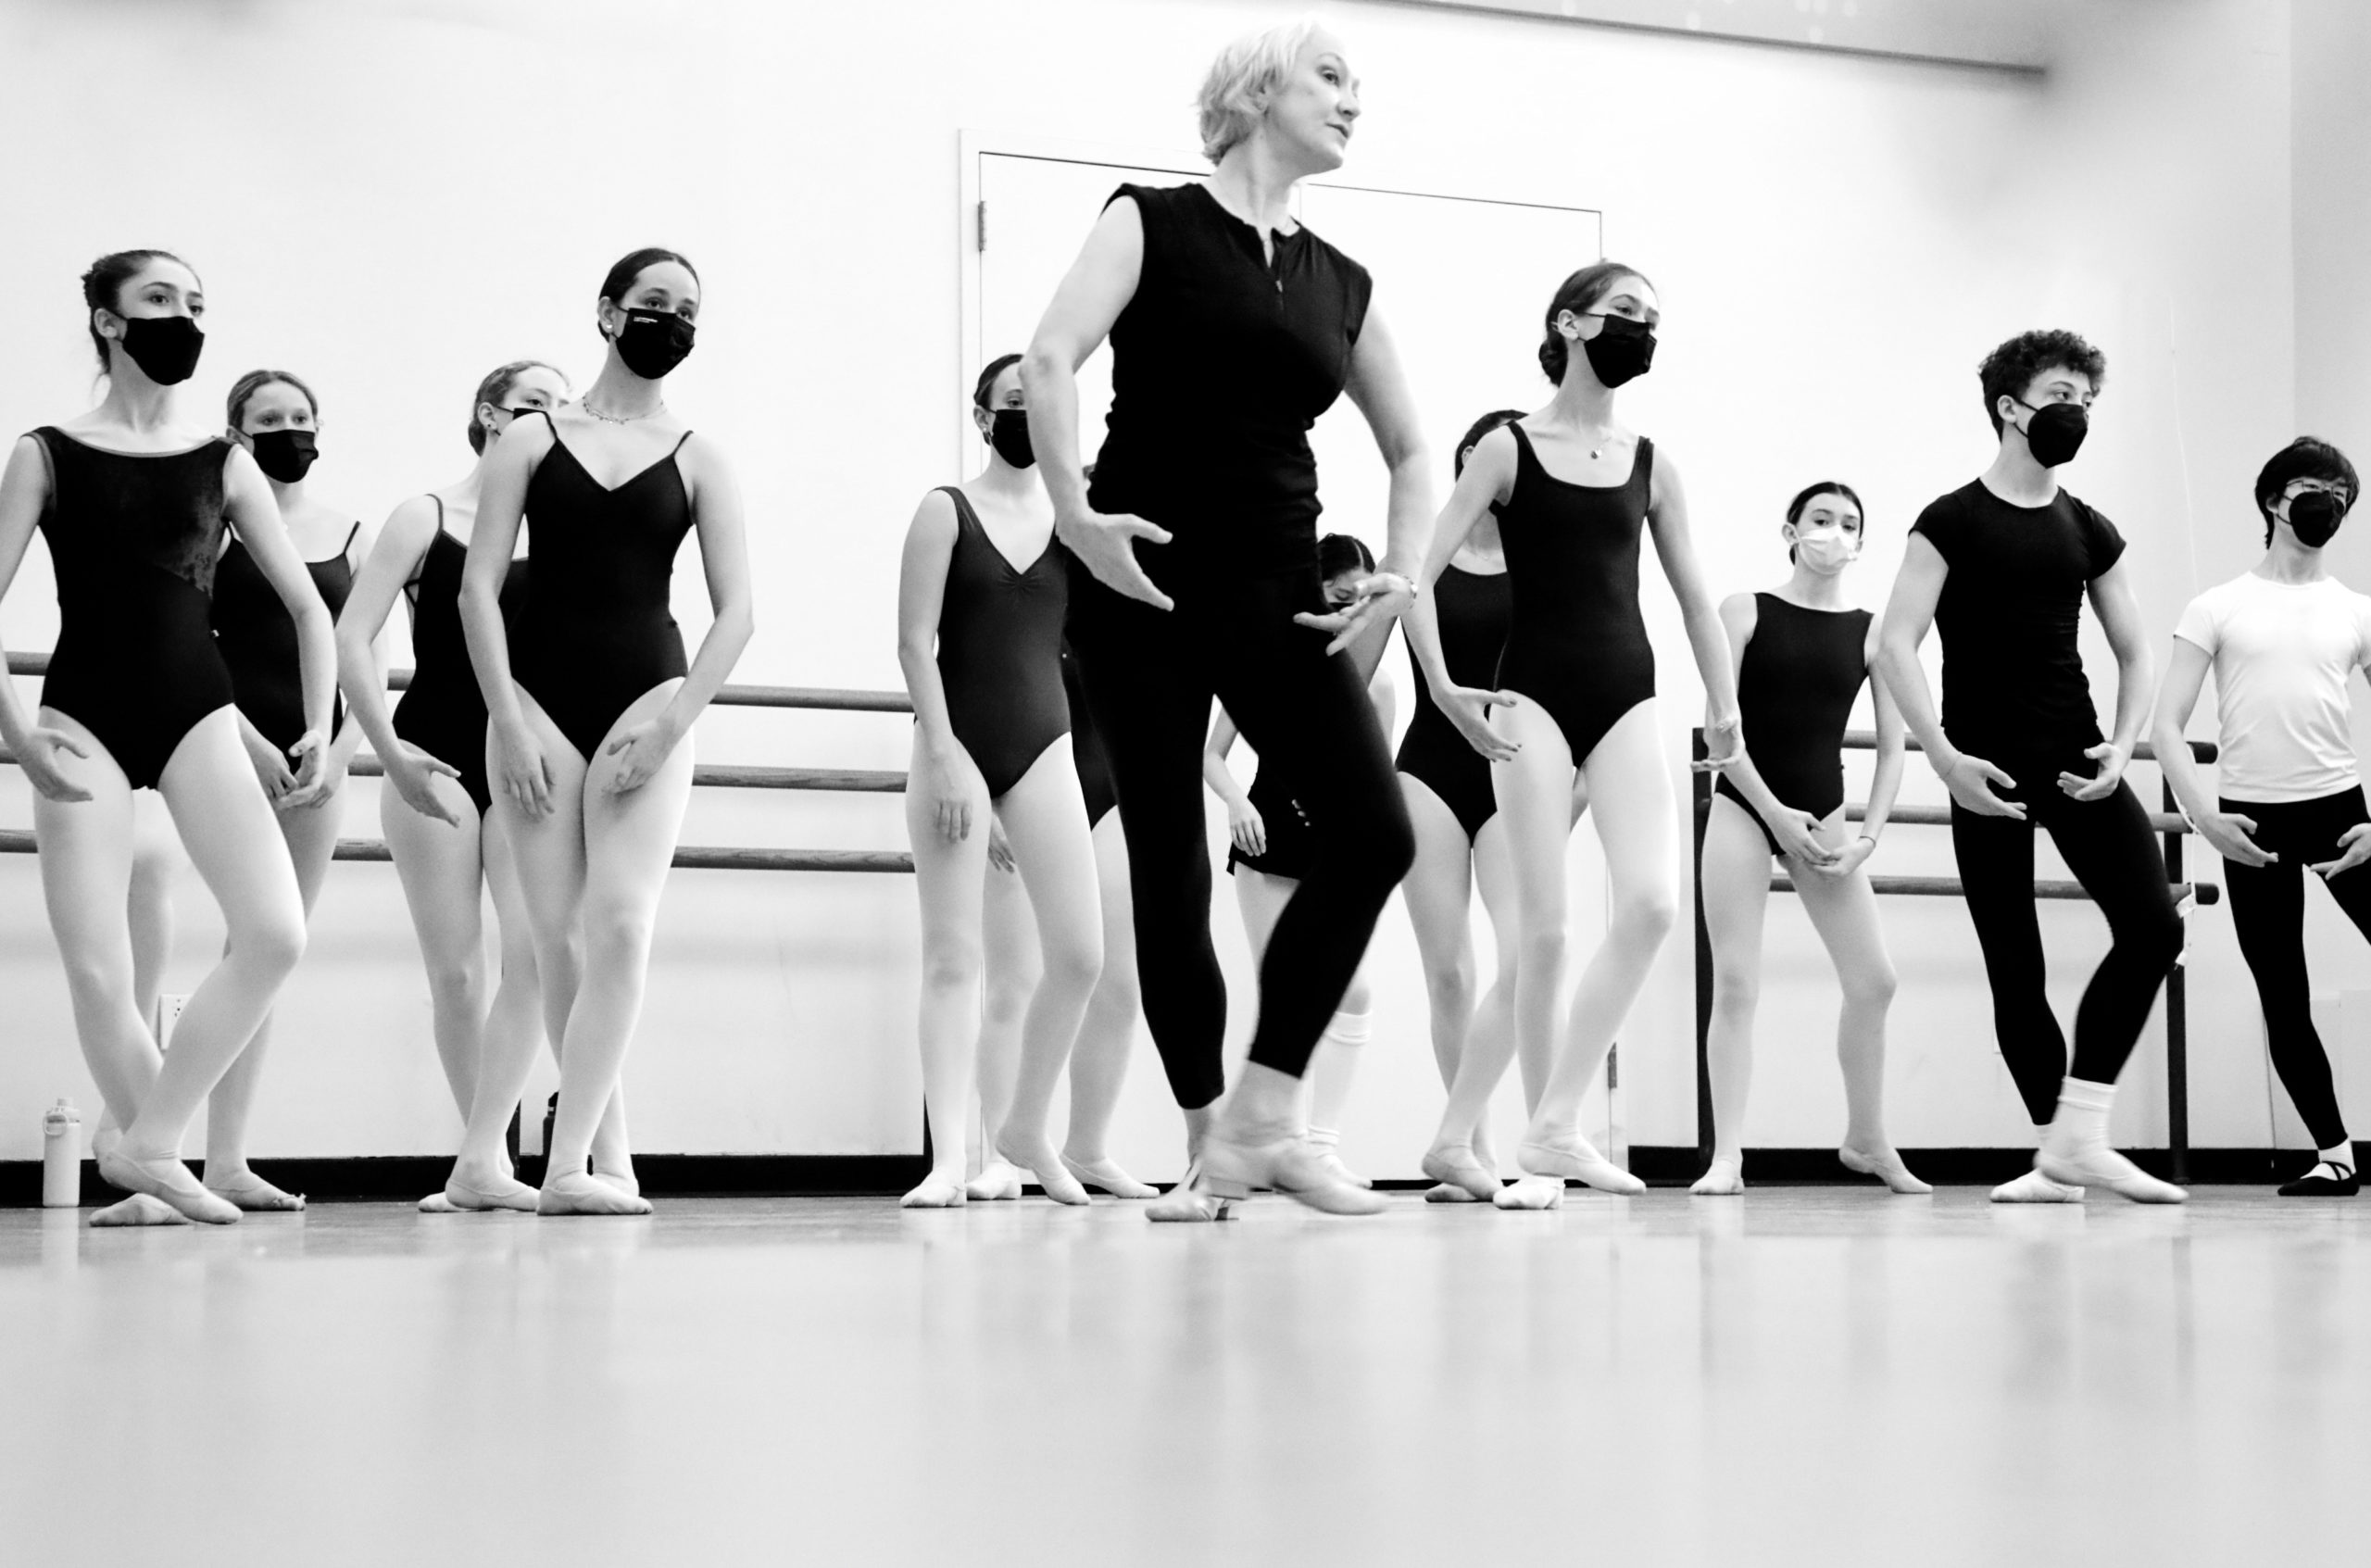 In this black and white photo, Deborah Wingert stands at the front of a ballet class and demonstrates a step moving through fifth position with her arms en bas. Behind her, a large class of students wearing dance clothing, ballet slippers and face masks copy her movements.